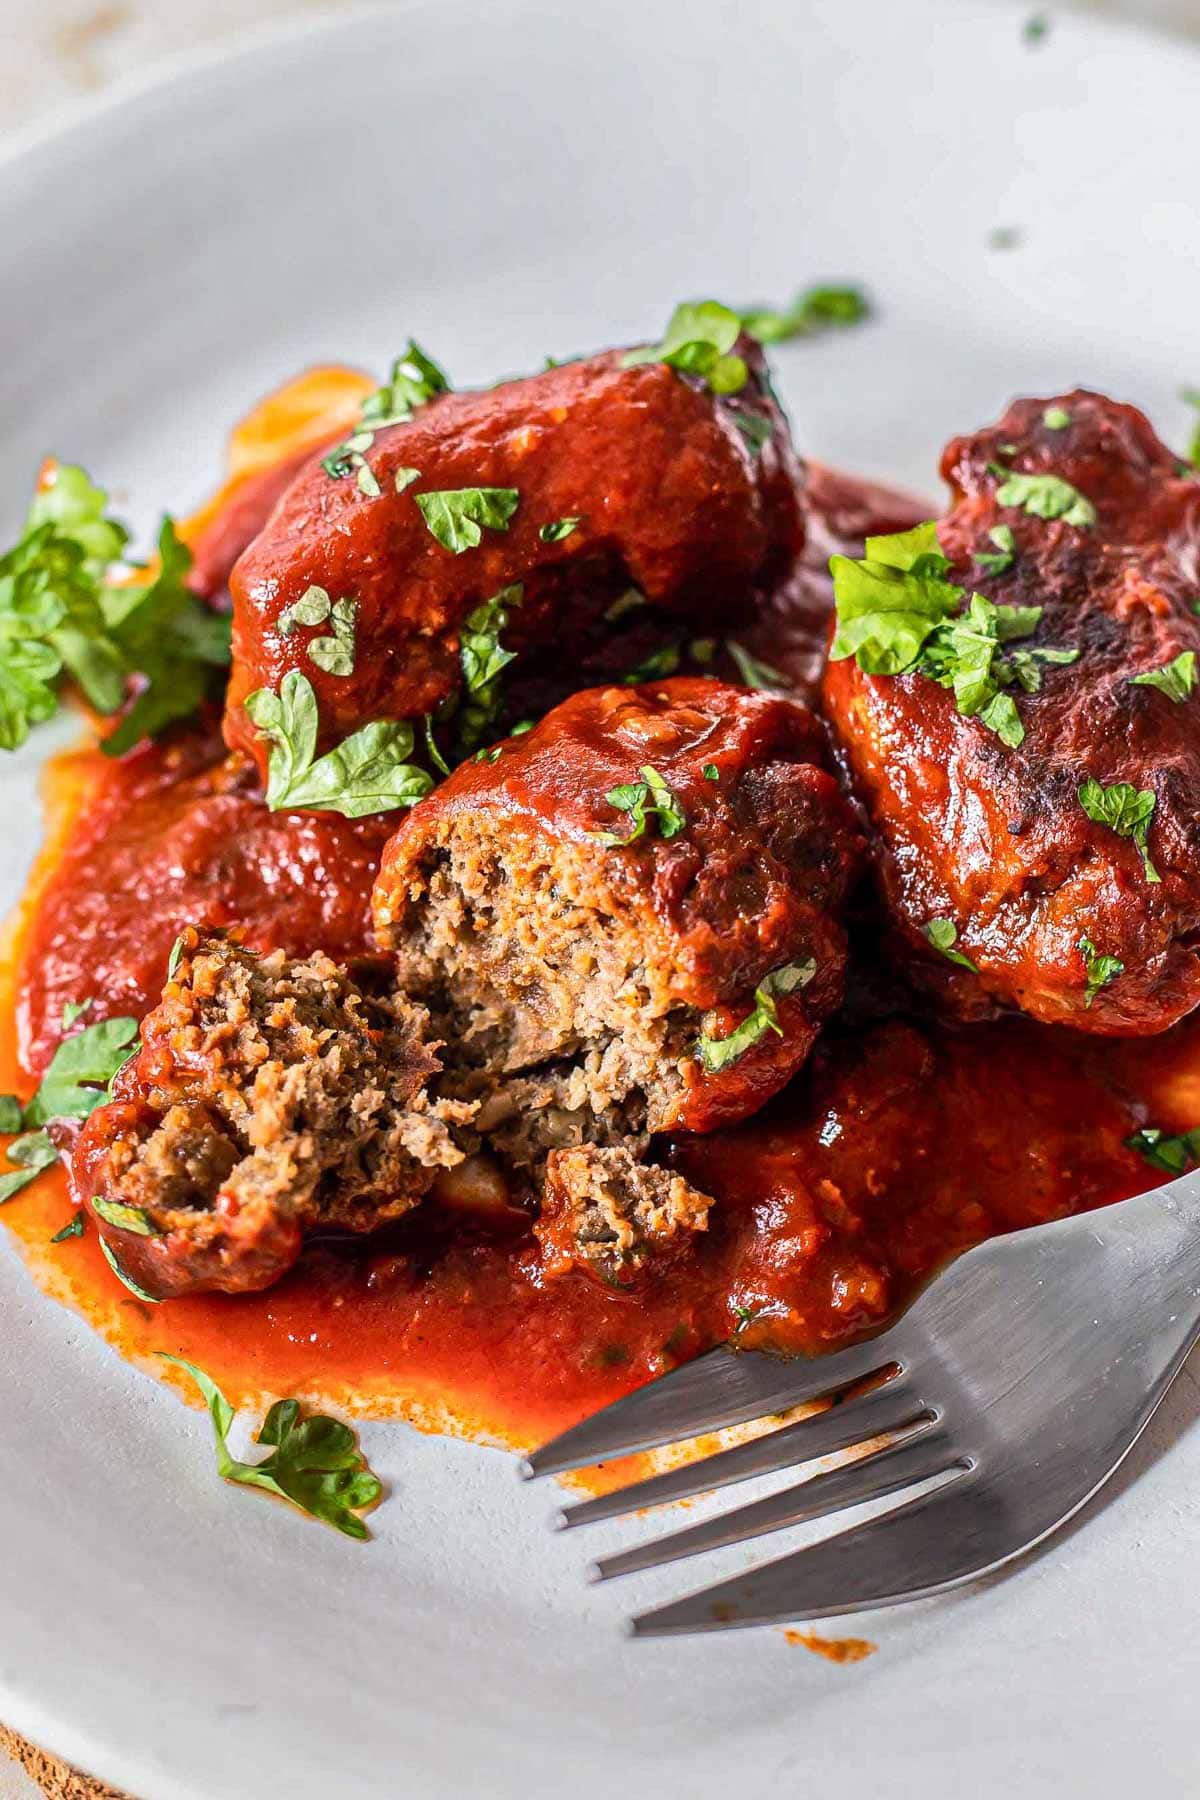 meatballs in tomato sauce on plate with fork cutting one in half.